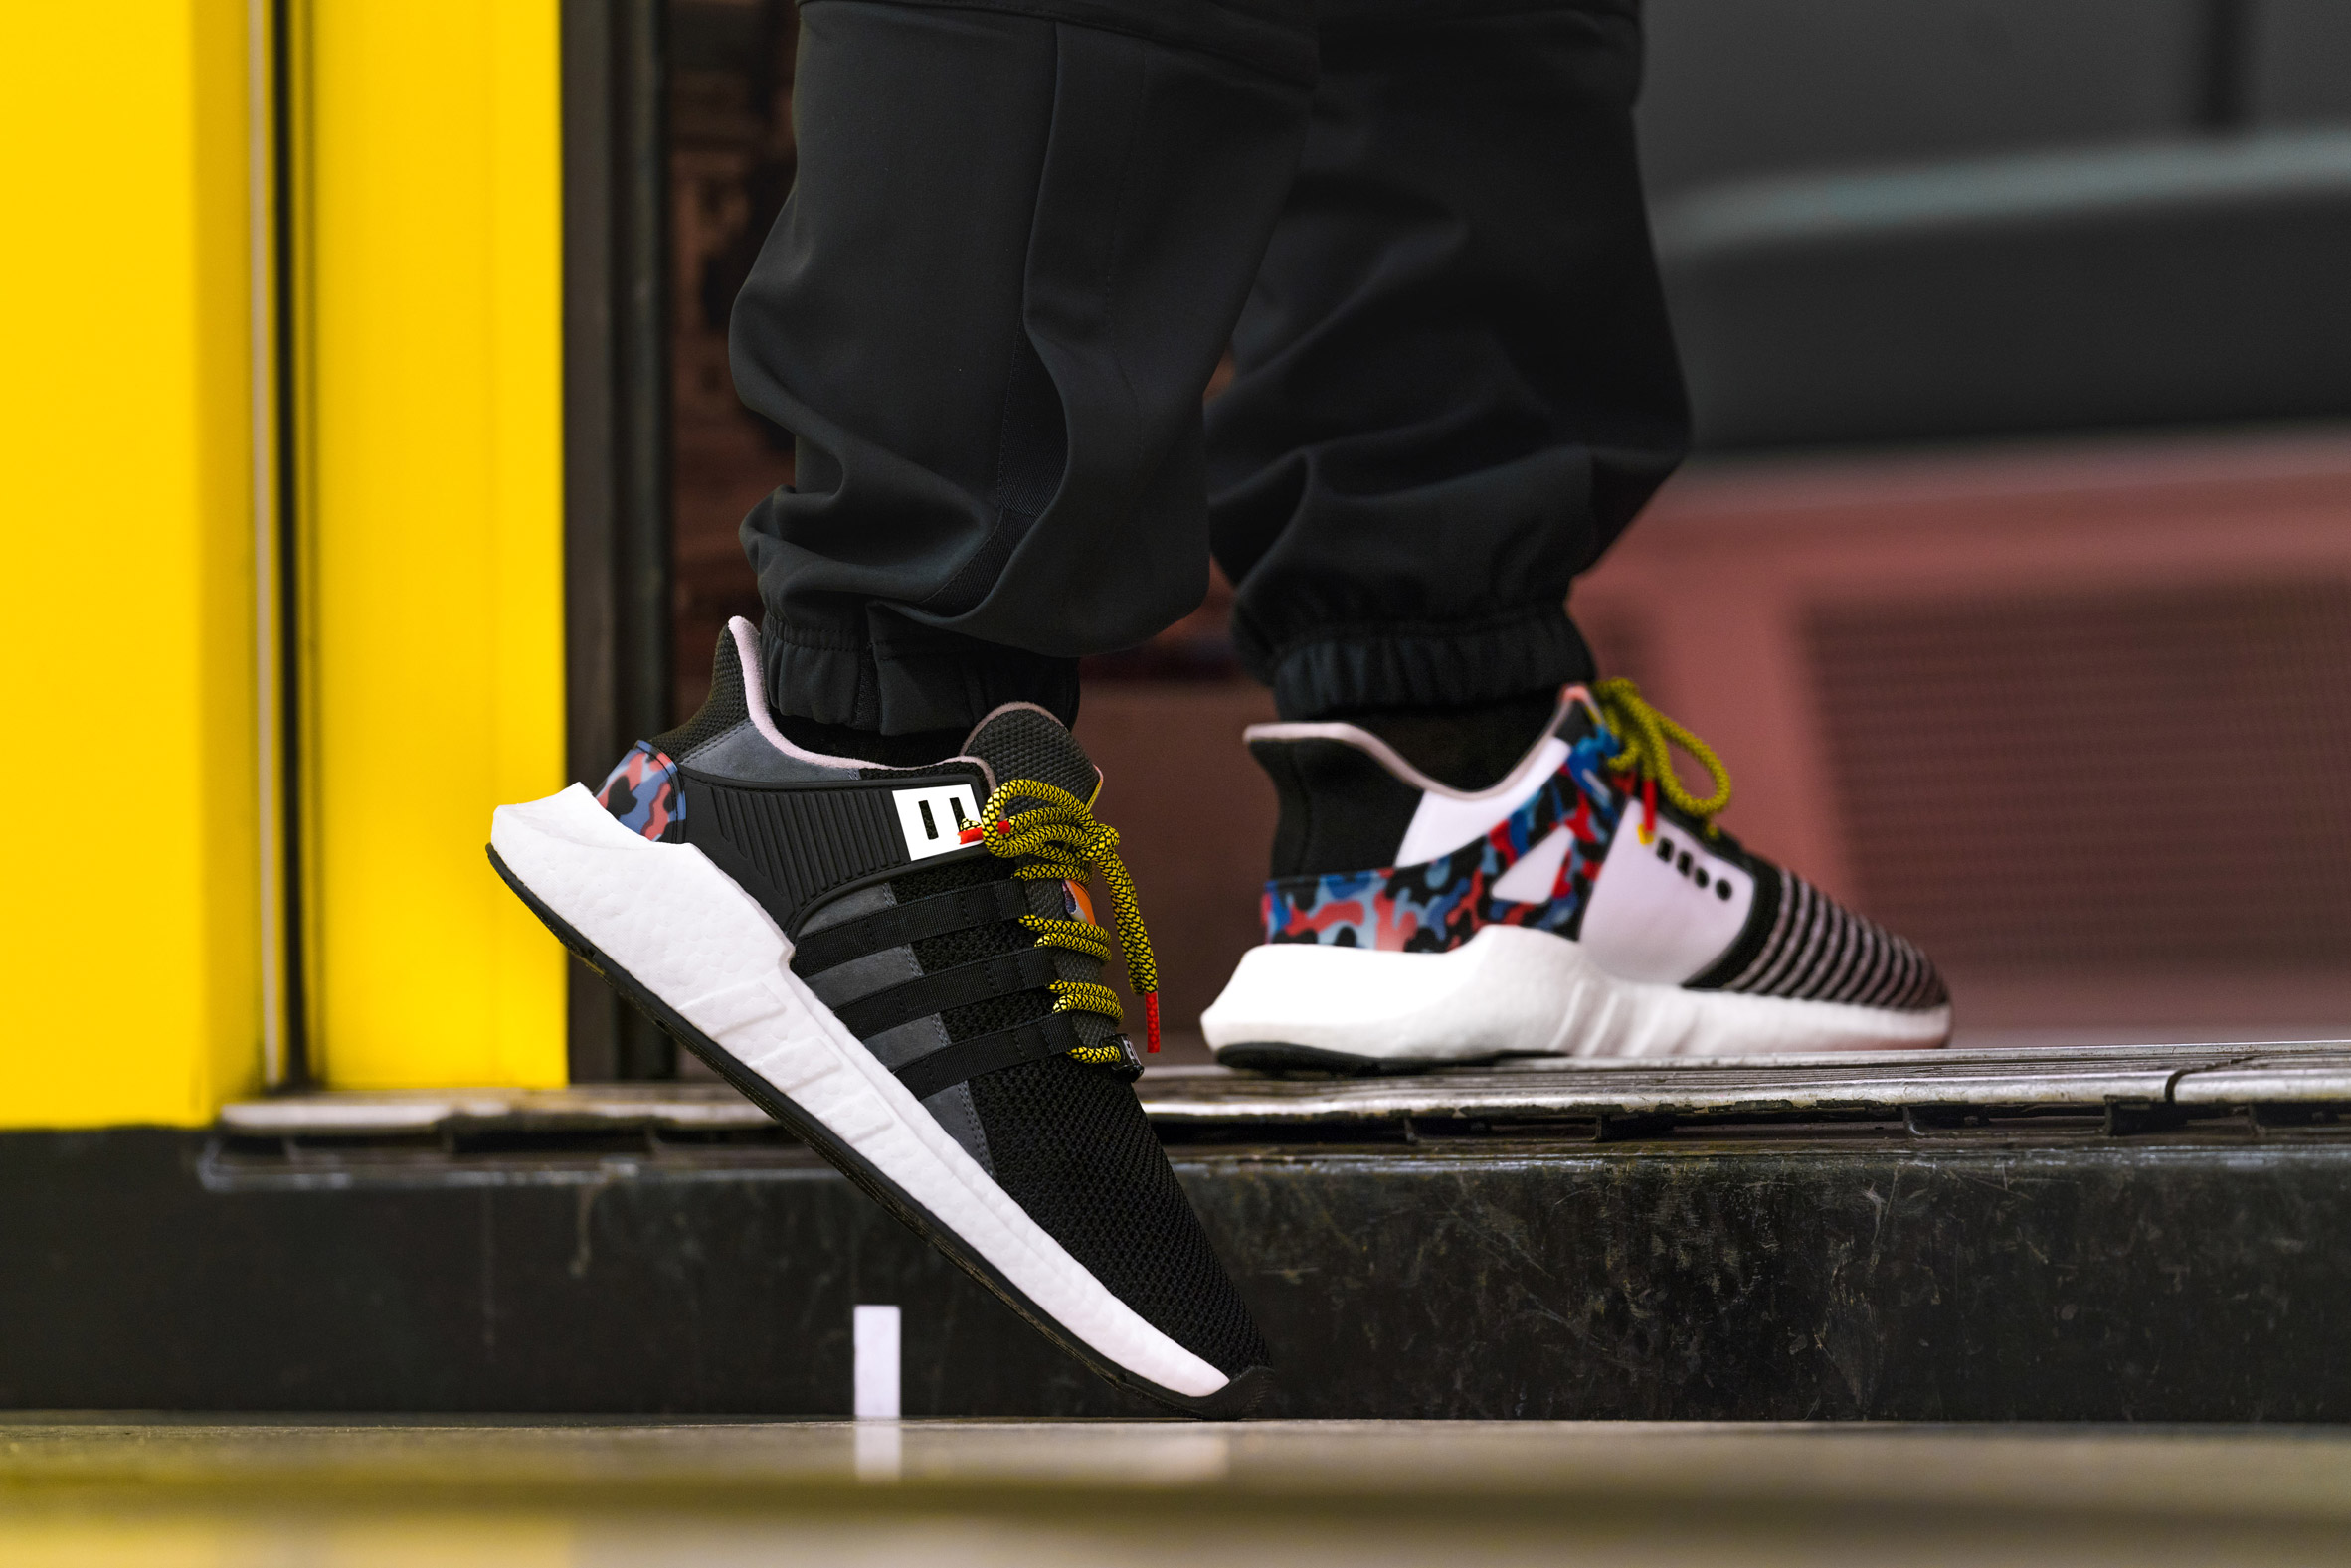 diefstal Taiko buik Kerstmis Adidas releases limited-edition trainers that match Berlin subway seats